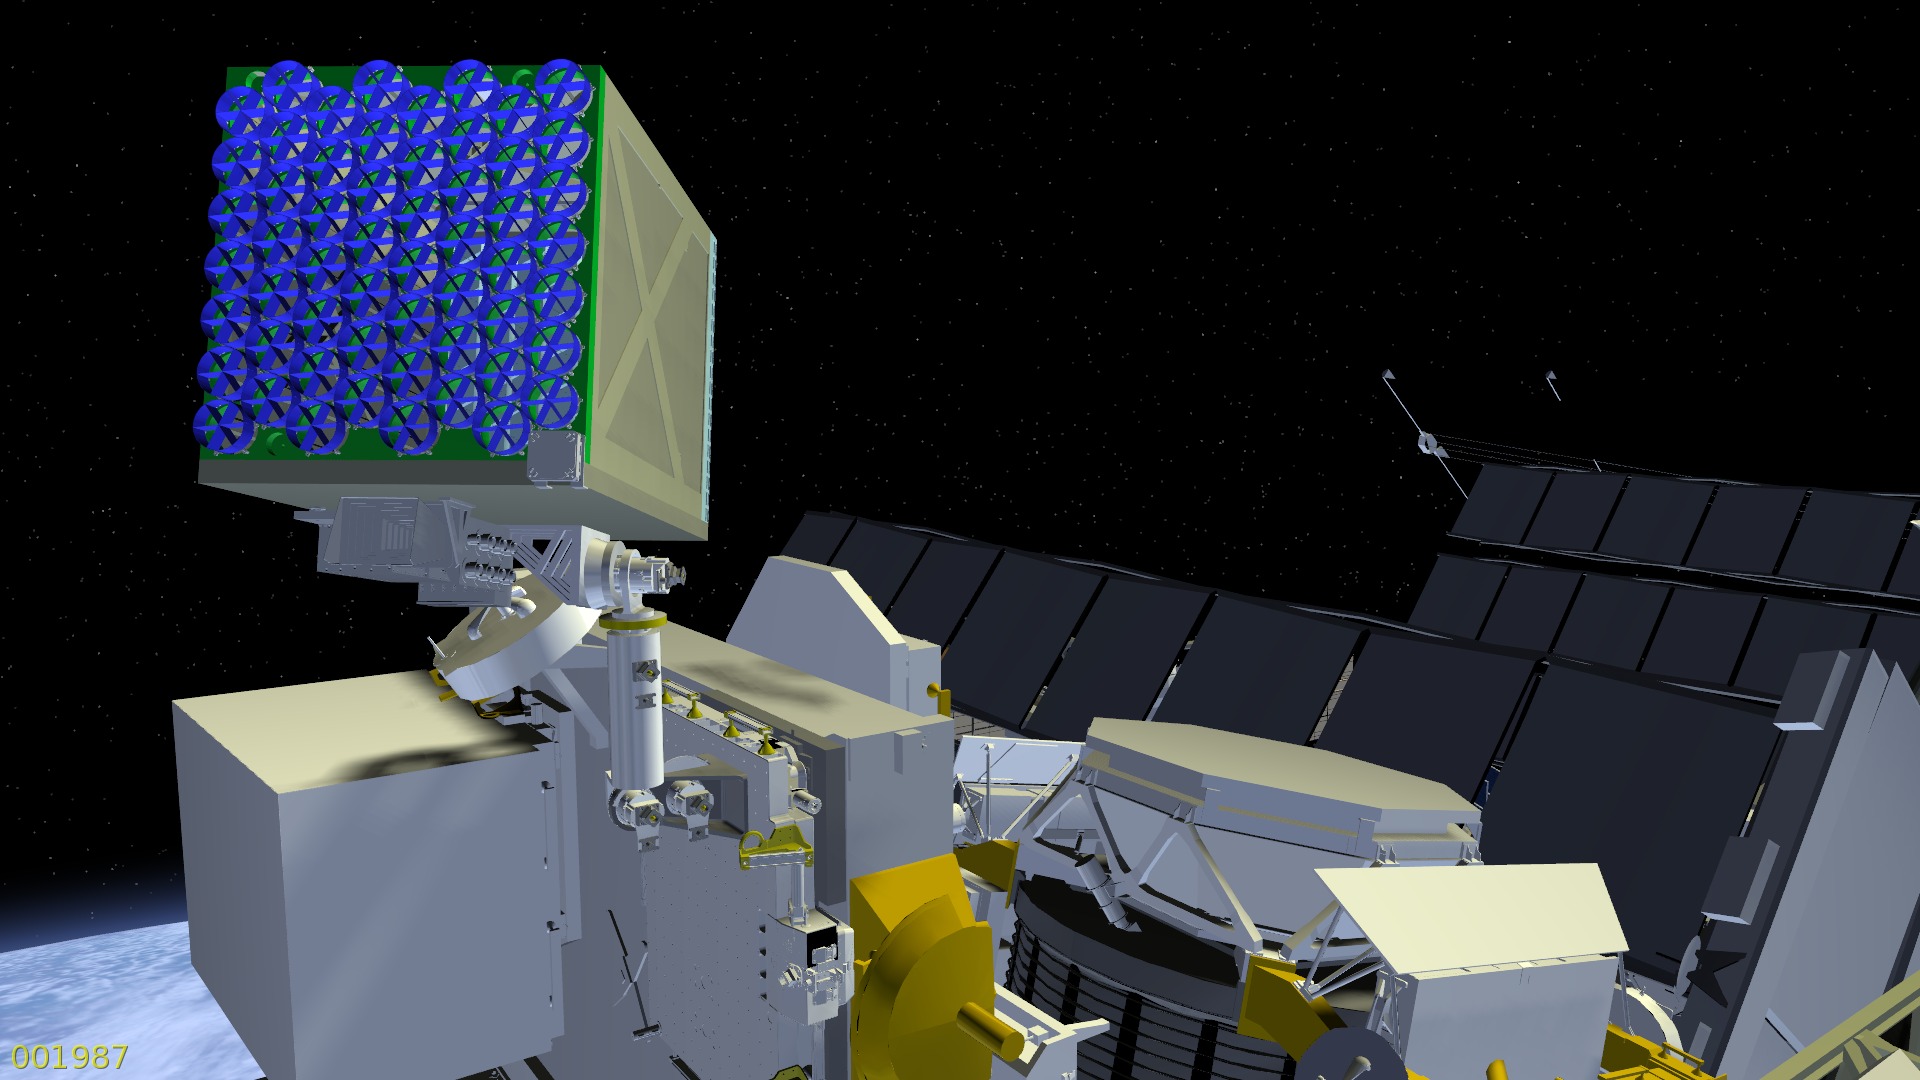 Artist concept of payload attached to International Space Station. The payload is a cube with one blue gridded side.